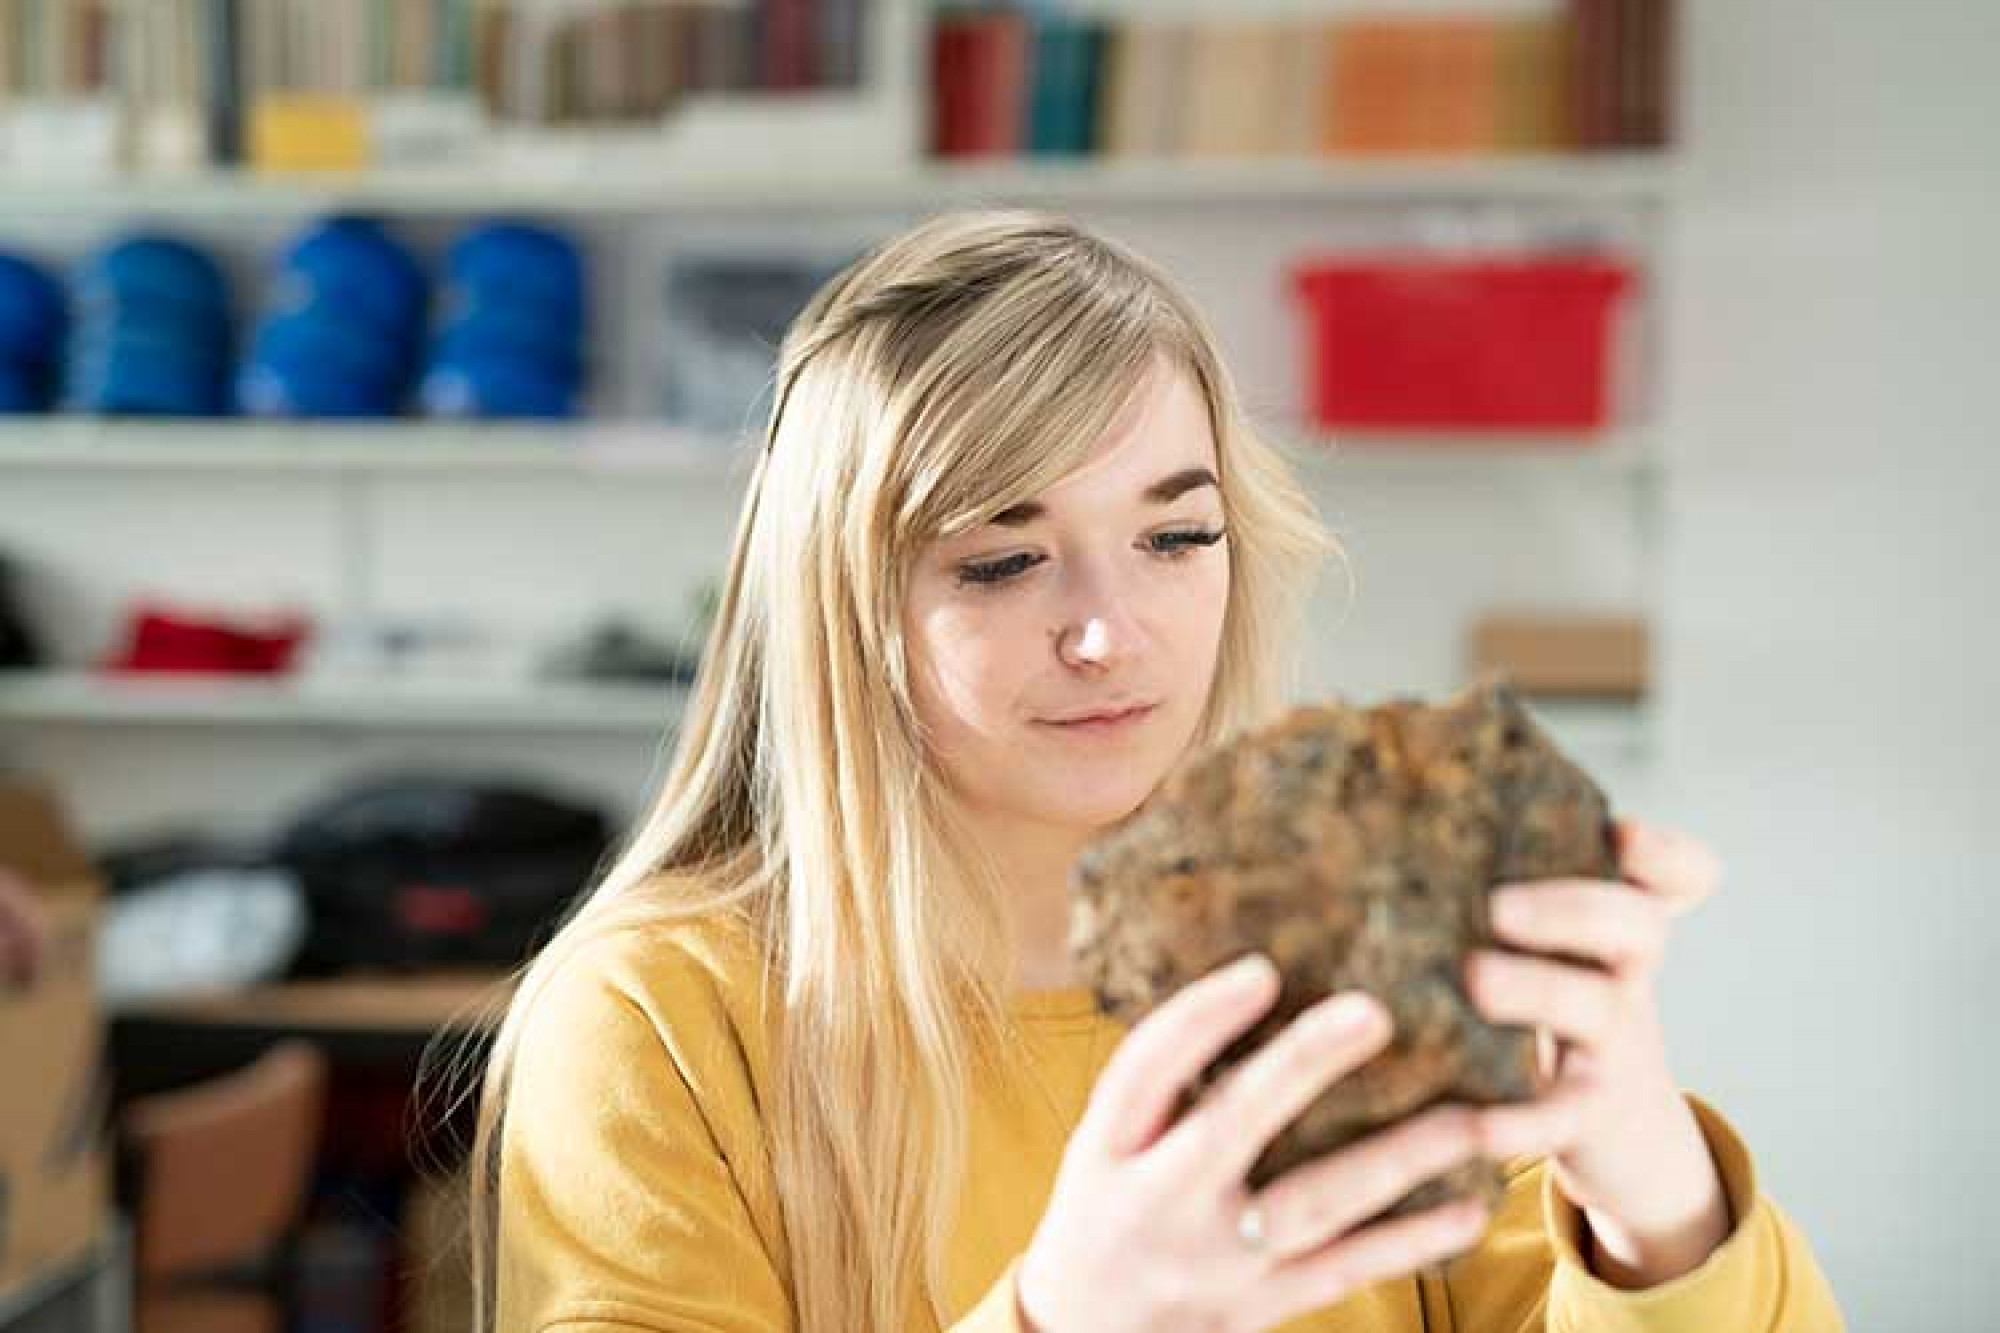 Student with long blonde hair holding a rock